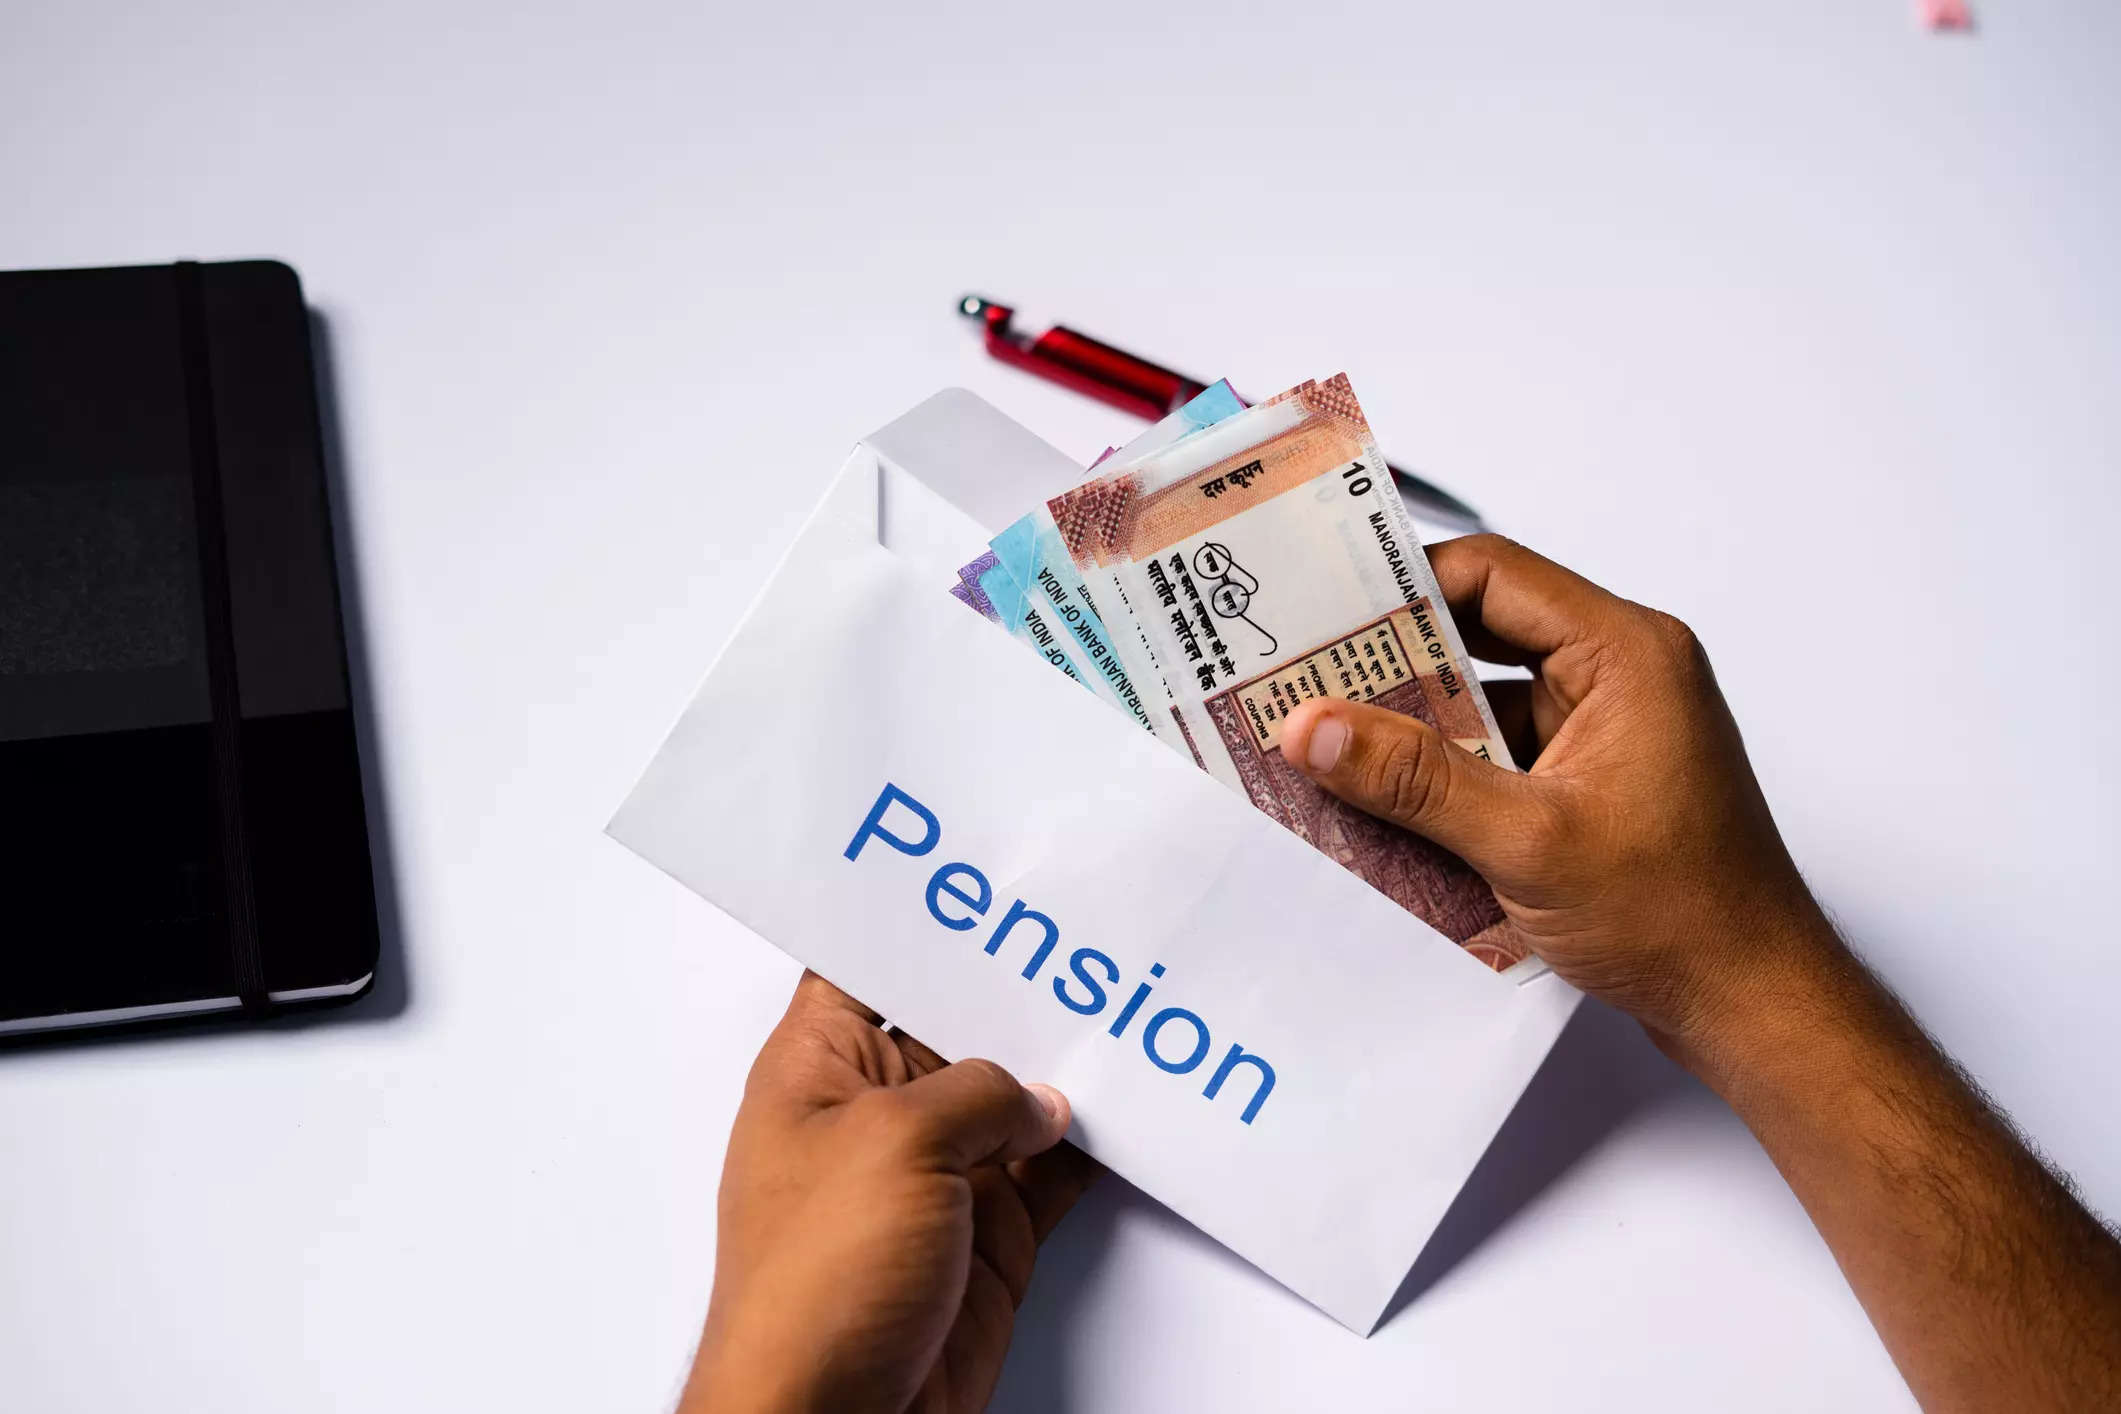 Reactive your National Pension System (NPS) account using these steps